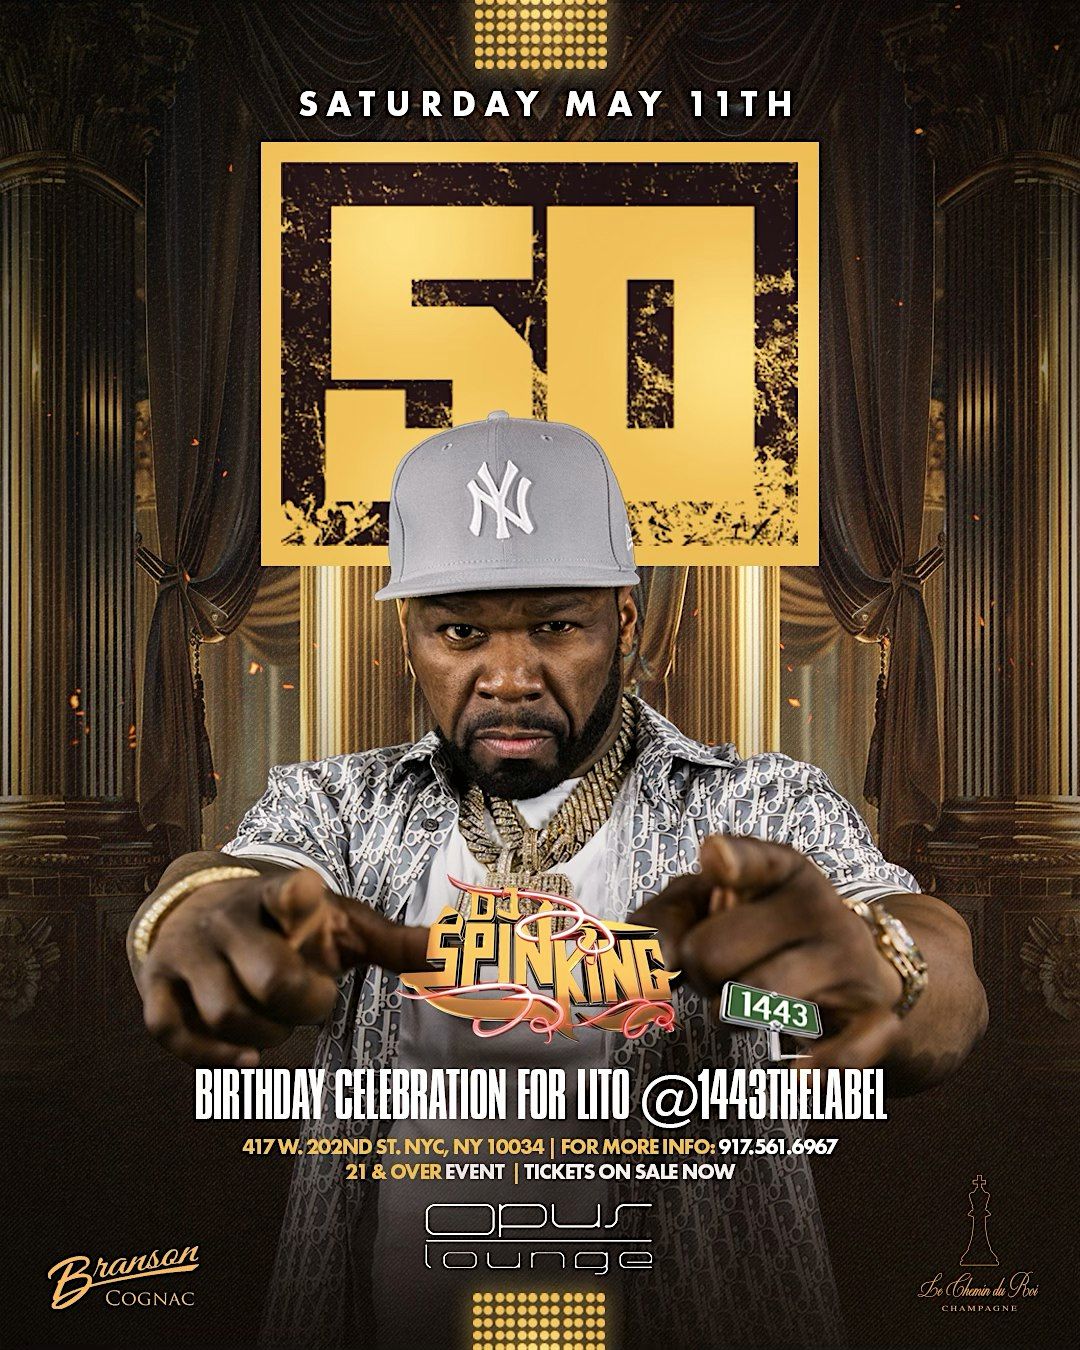 50 CENT CONCERT AFTER PARTY AT OPUS NYC - SAT MAY 11TH